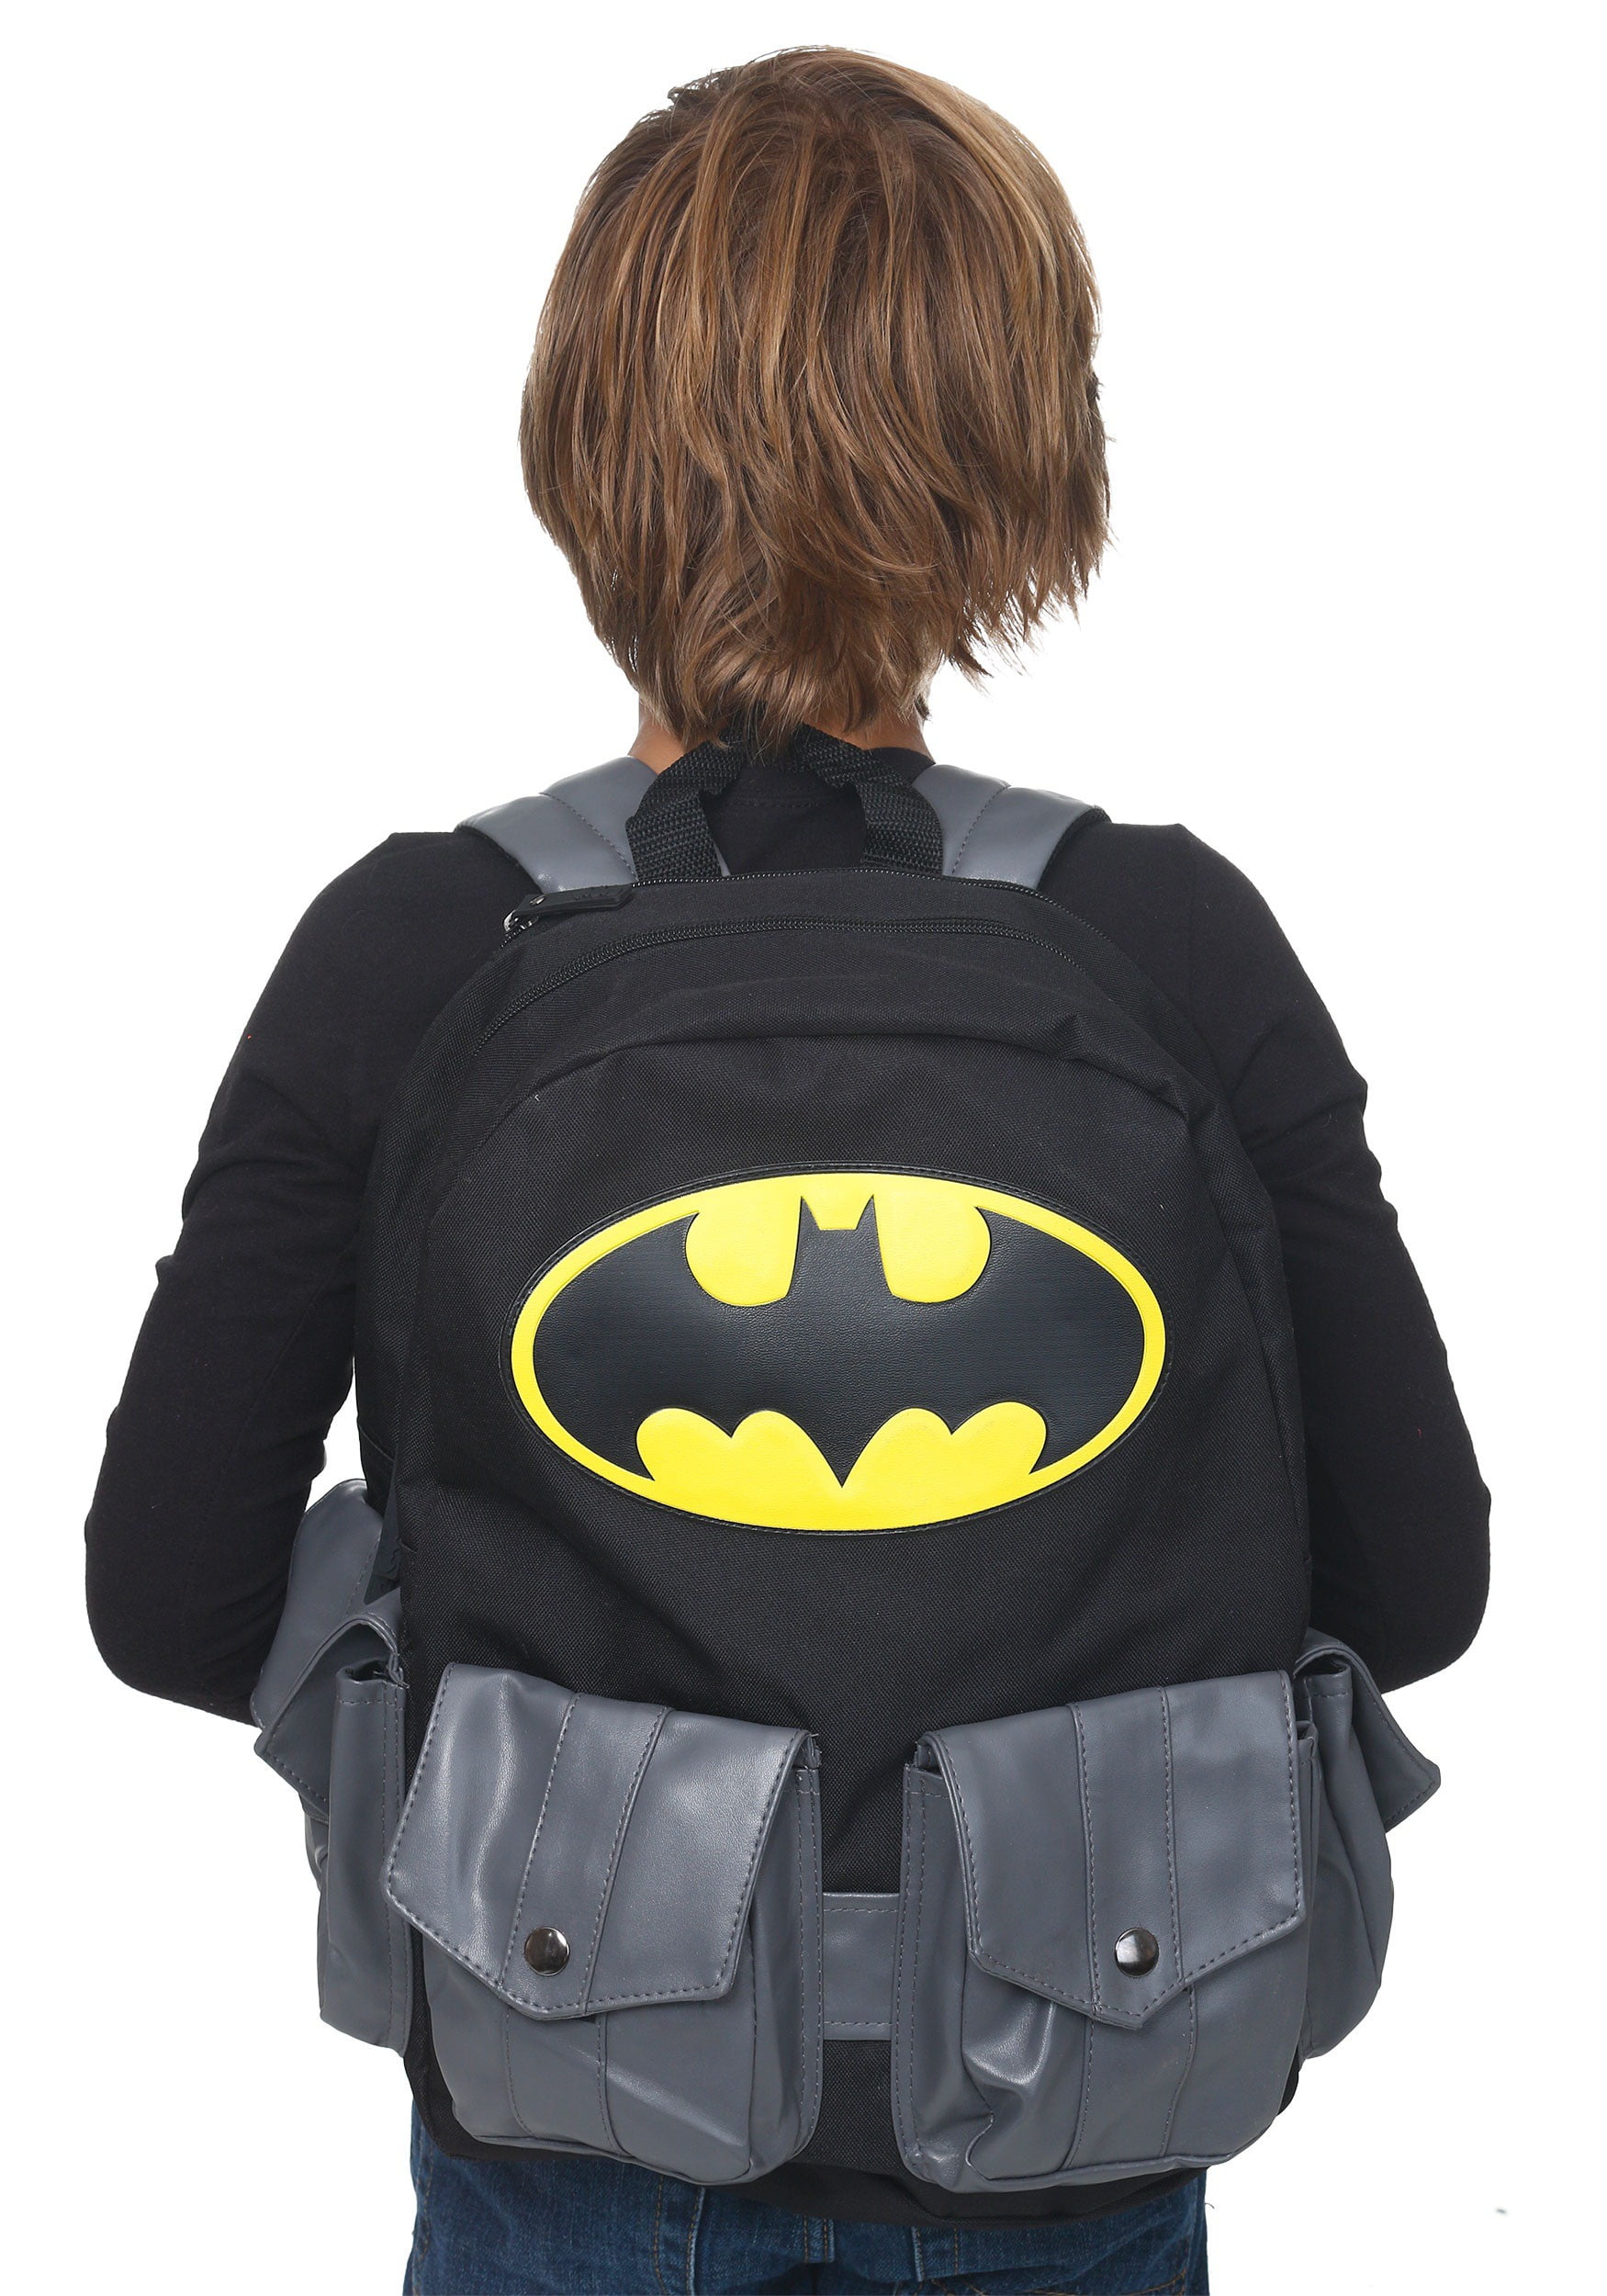 Leather Batman Backpack Inspired by 'The Dark Knight' Films